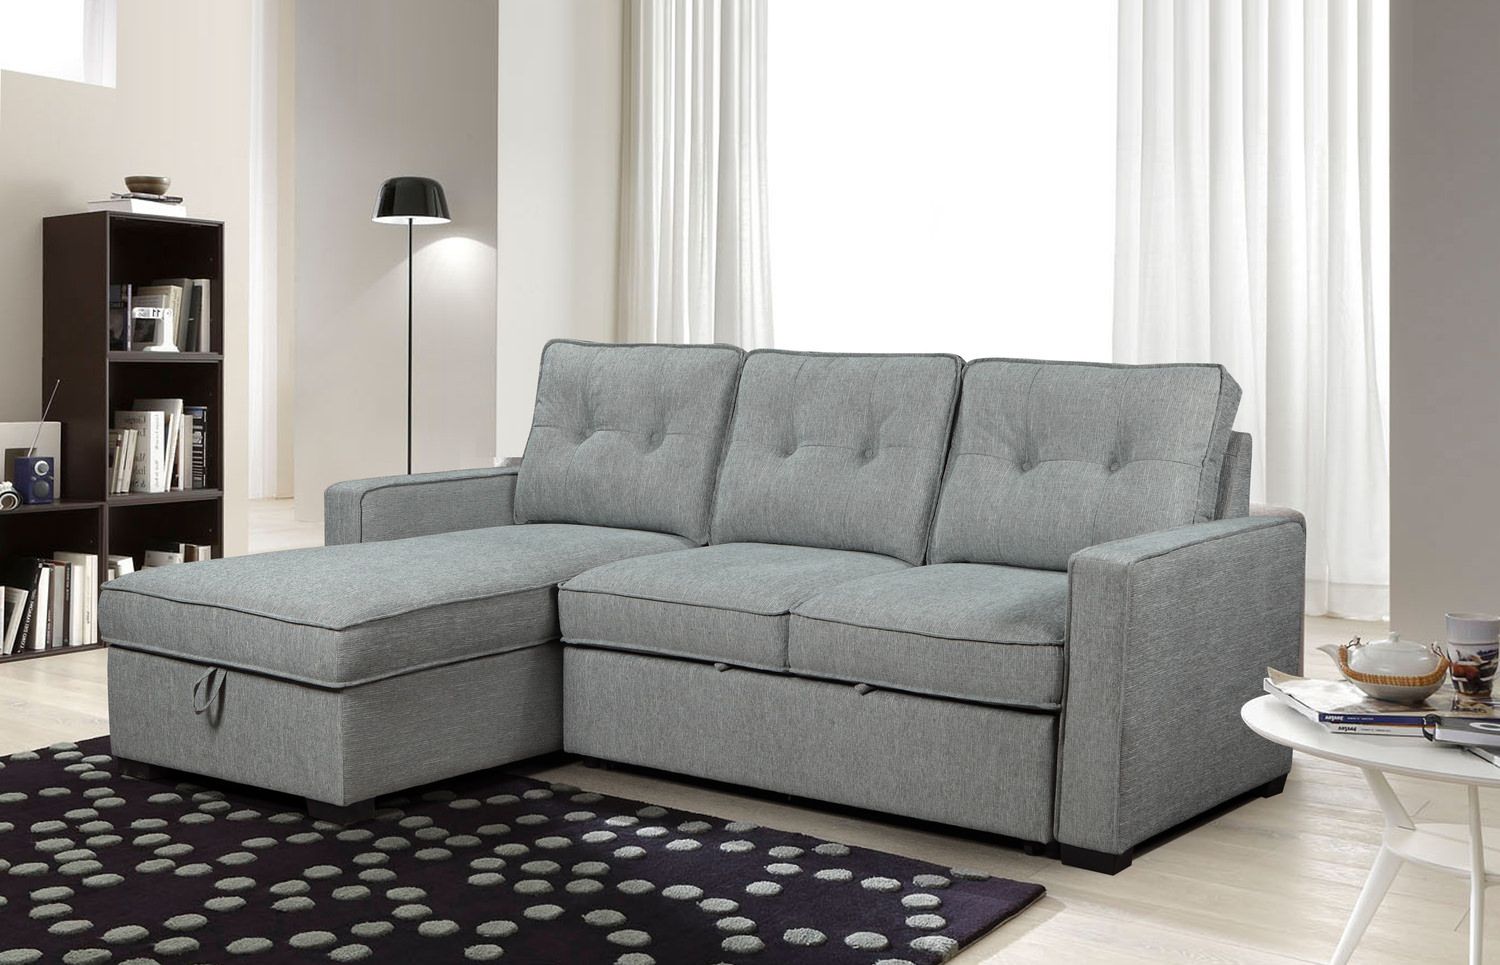 Casper 2 Piece Modular Sectional With Pull & | Hom Furniture Throughout Convertible Sofa With Matching Chaise (Gallery 15 of 20)